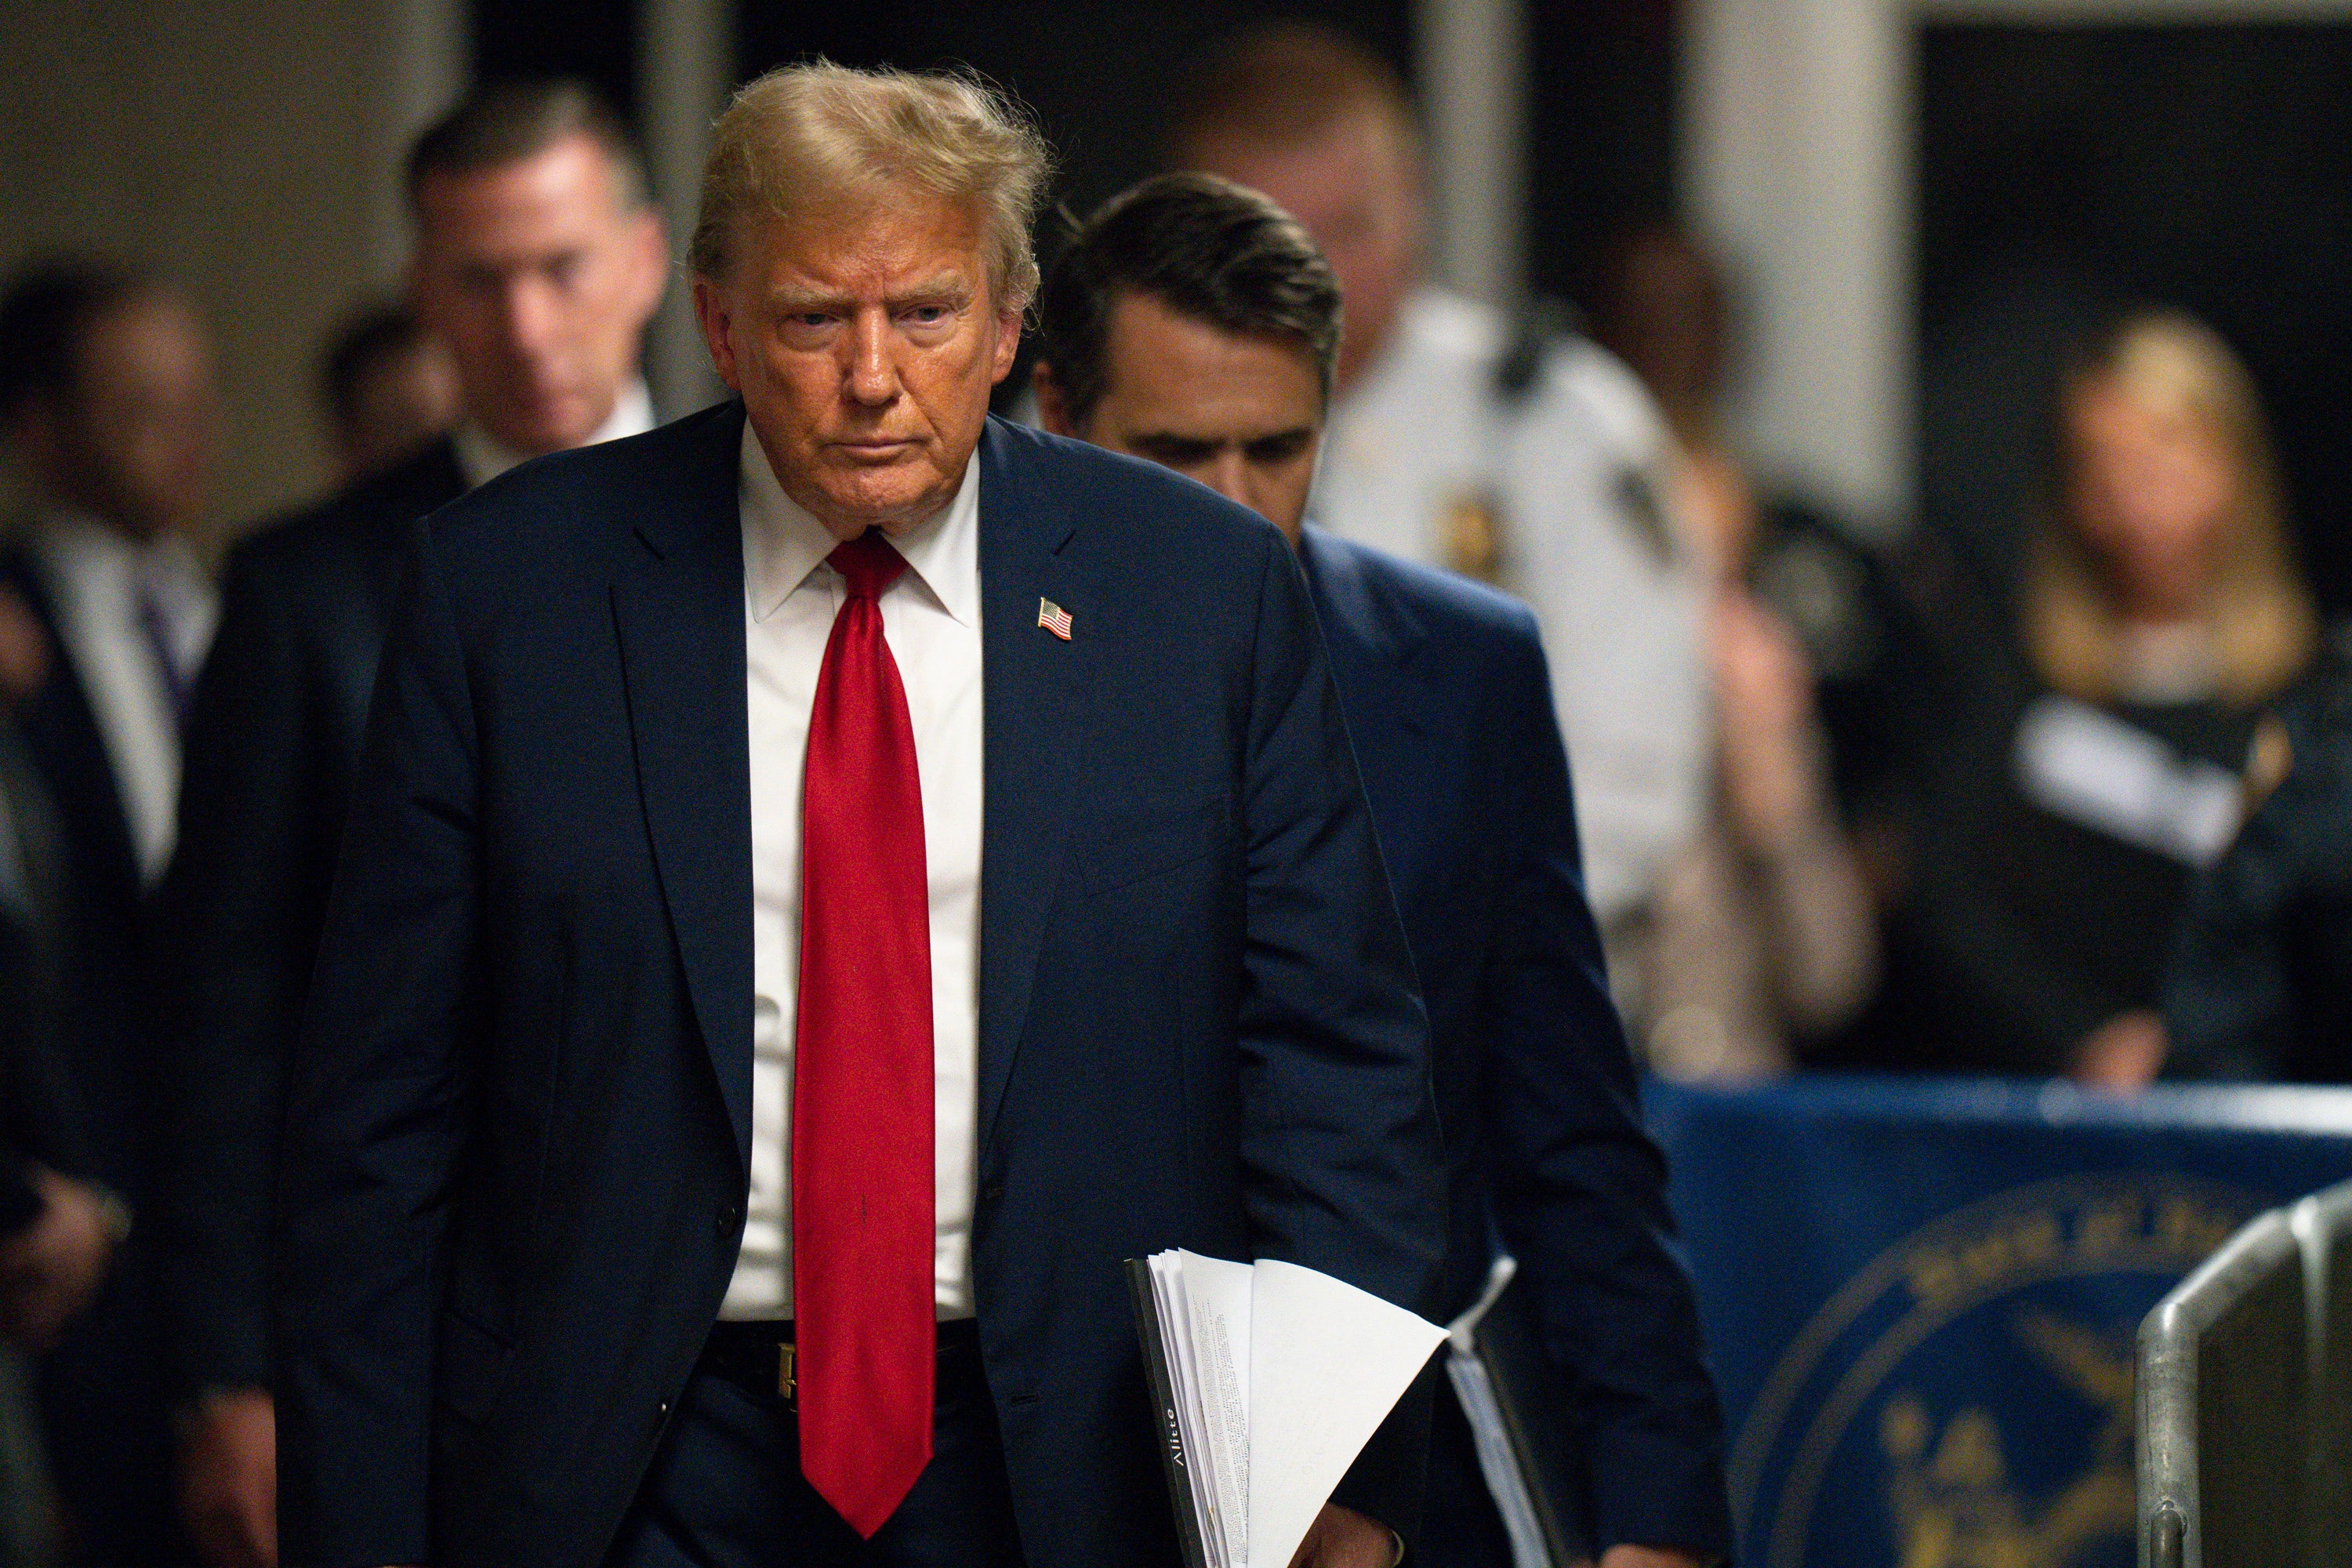 Donald Trump leaves a Manhattan criminal courtroom to speak with reporters on May 16.